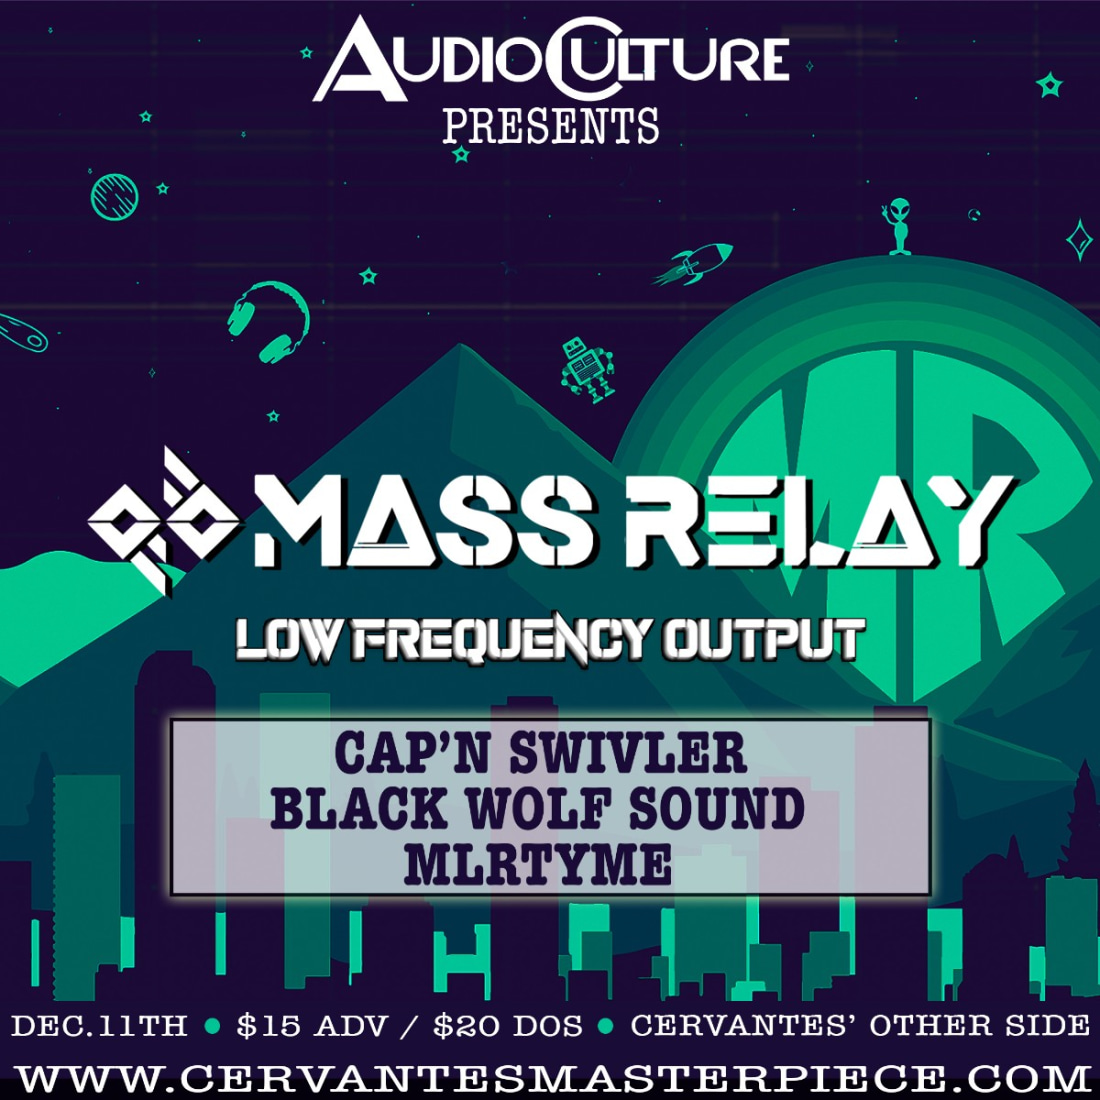 Mass Relay w/ Low Frequency Output, Cap'n Swivler, Black Wolf Sound, MIrTyme